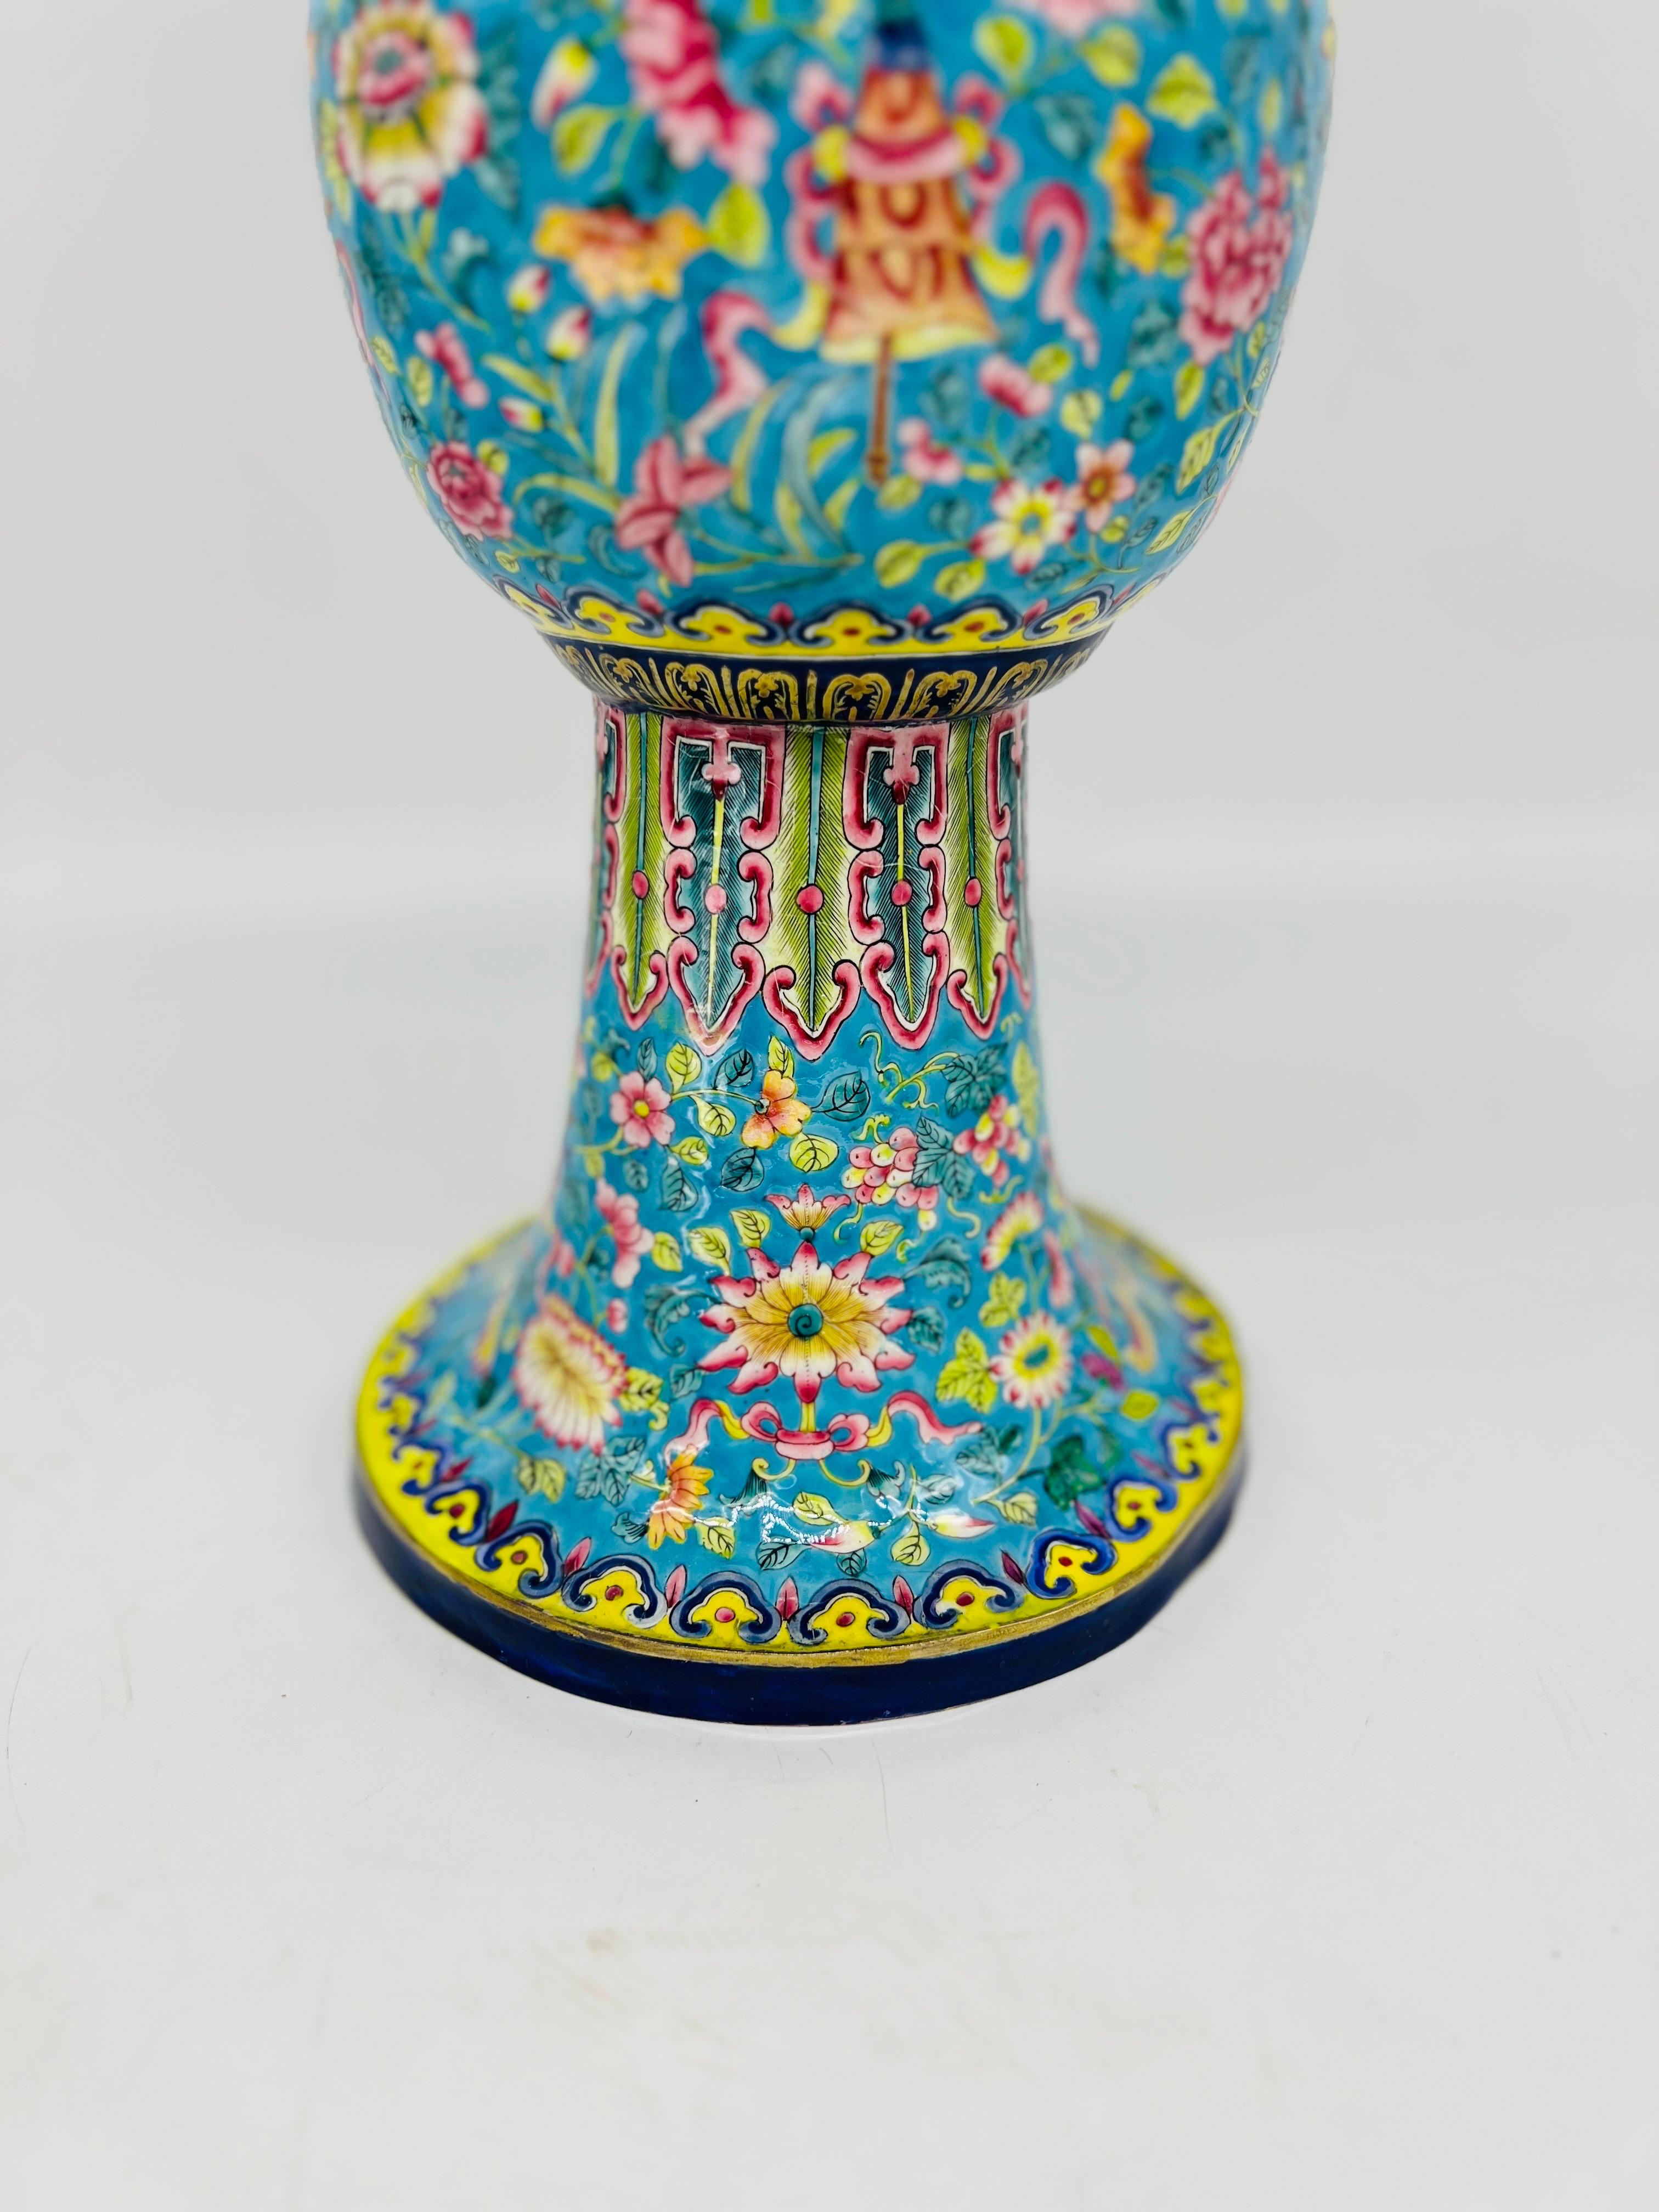 The Fine Quality Chinese Export Enamel on Copper Gu Form Vase is a stunning example of traditional Chinese craftsmanship. This vase is made from copper, which serves as the base material, and is adorned with exquisite enamel work. 

The gu form,